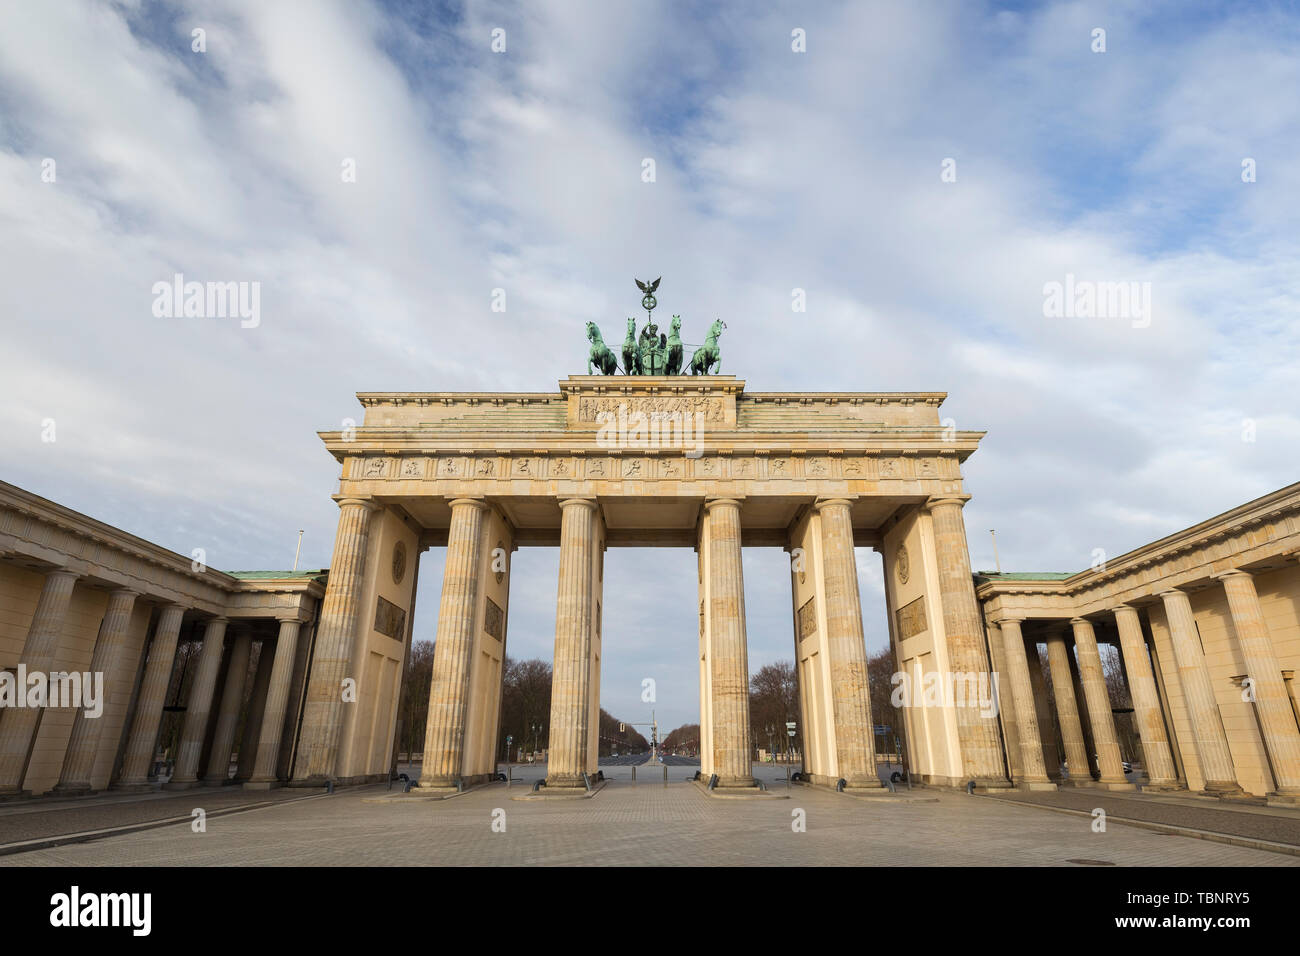 Front view of the famous neoclassical Brandenburg Gate (Brandenburger Tor) in Berlin, Germany, on a sunny day. Stock Photo